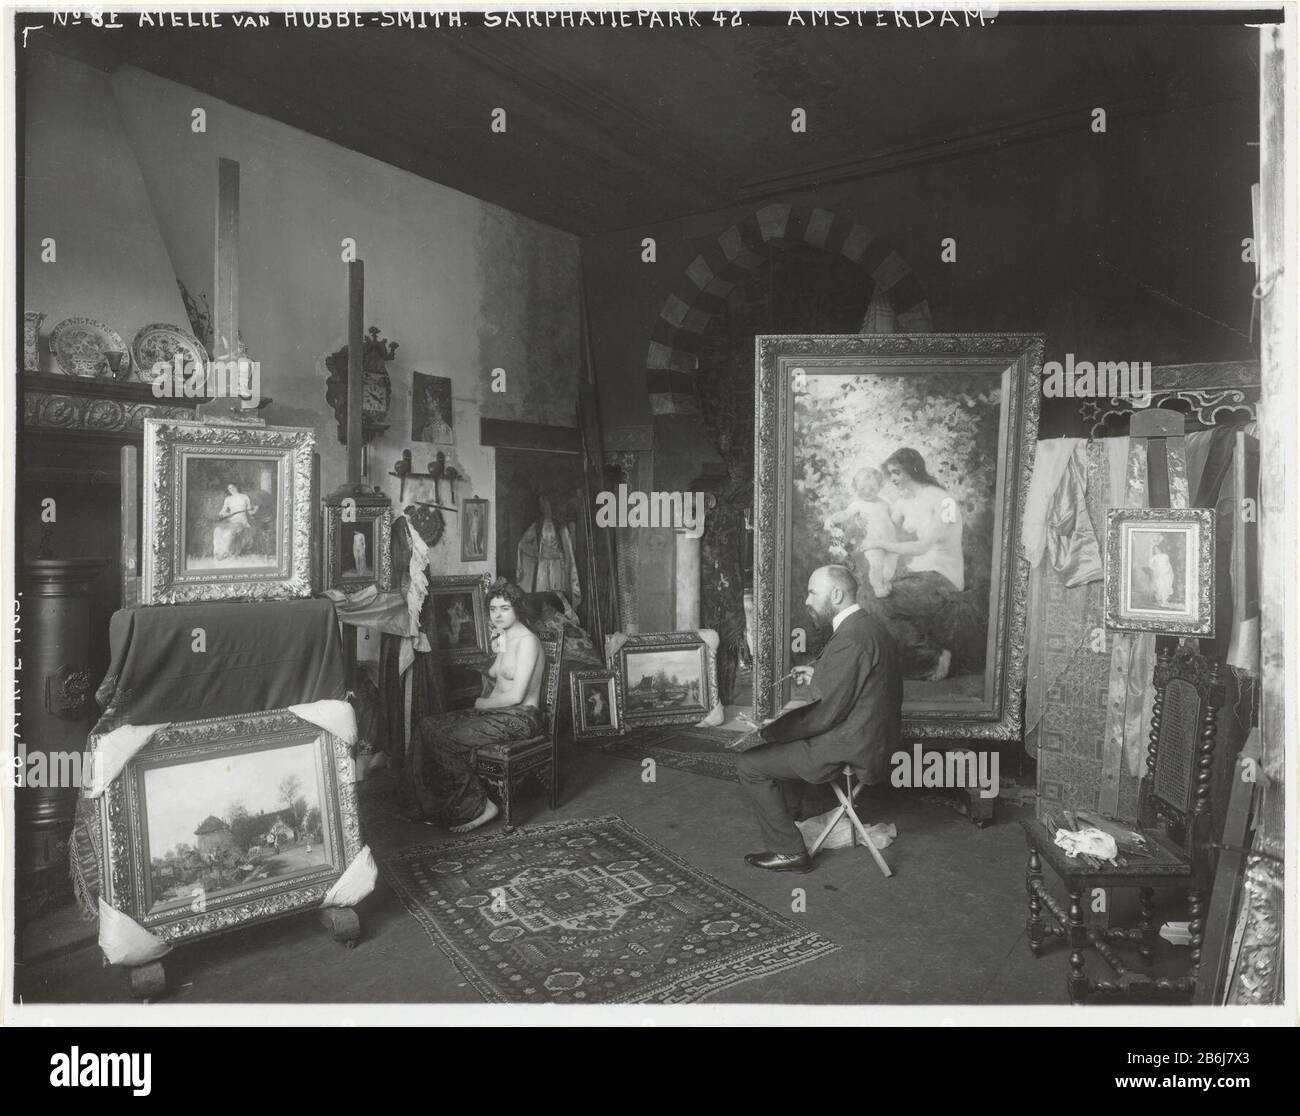 The painter Hobbe Smith in his studio, Sarphatipark 42, Amsterdam, with a model RP-F-00-2609 The painter Hobbe Smith in his studio, Sarphatipark 42, Amsterdam, with a model object type: photo late edition Item number: RP-F 00-2609 Manufacturer : Photographer: Sigmund Löwfotograaf: Atelier Herz Dating: Apr 28 1903 Physical features: gelatin silver printing technique: gelatin silver print procurement and Stock Photo